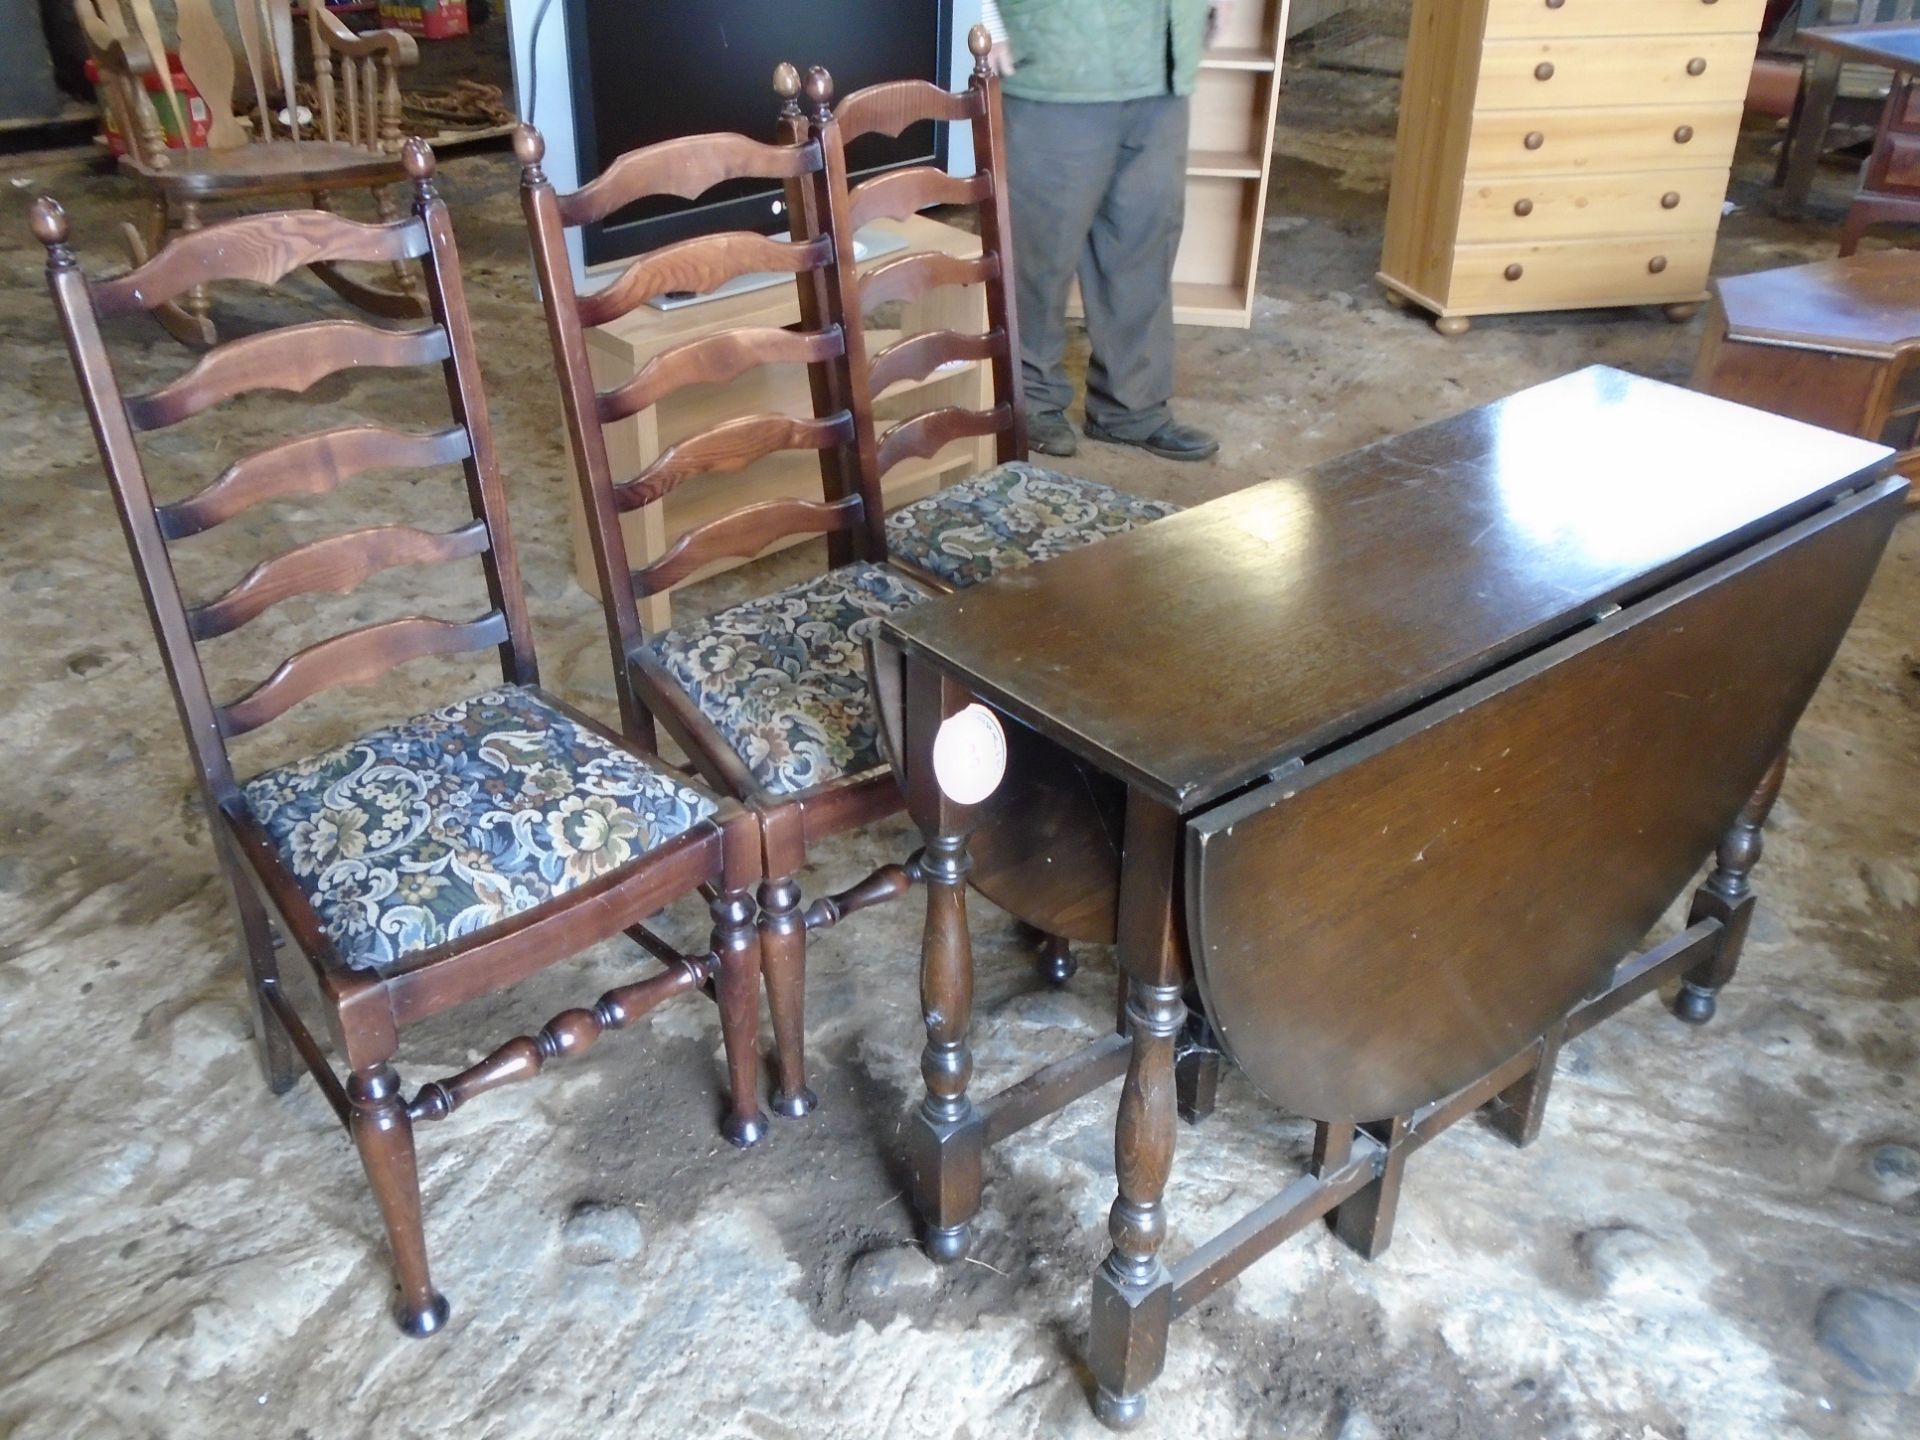 Drop leaf table & 3 chairs